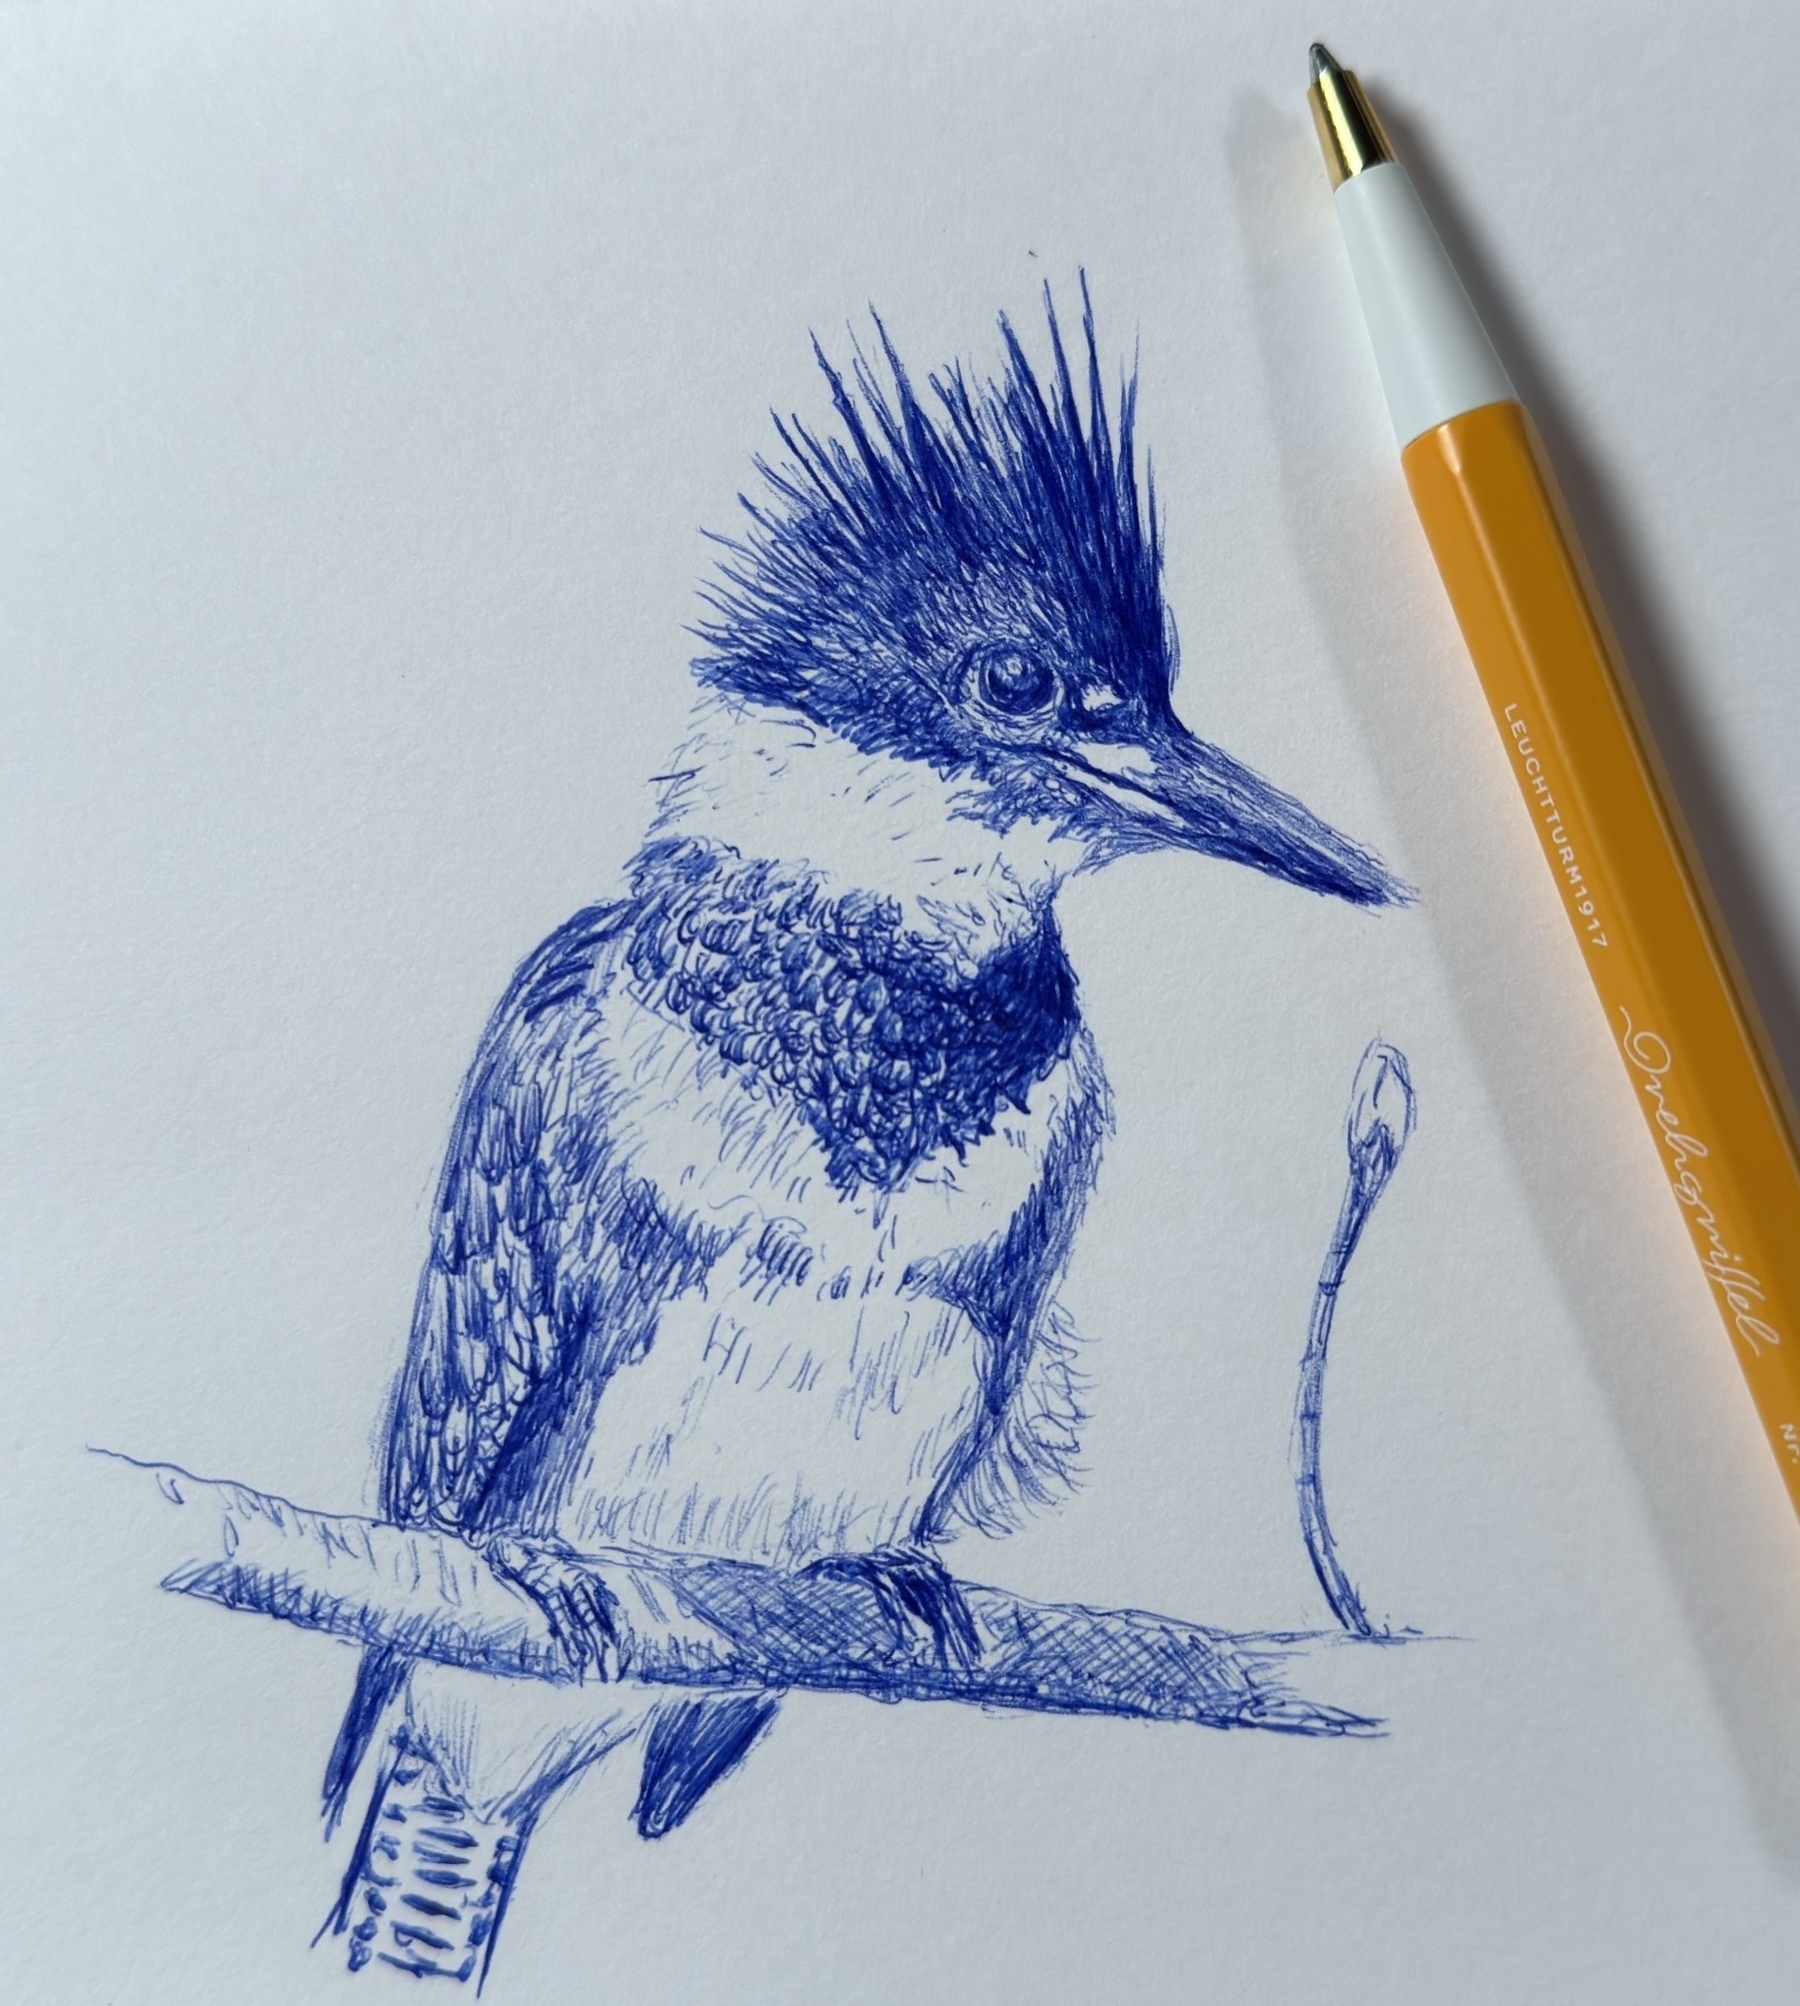 Pen drawing of a belted kingfisher, created with a Leuchtturm pen in a Leuchtturm 1917 sketchbook.